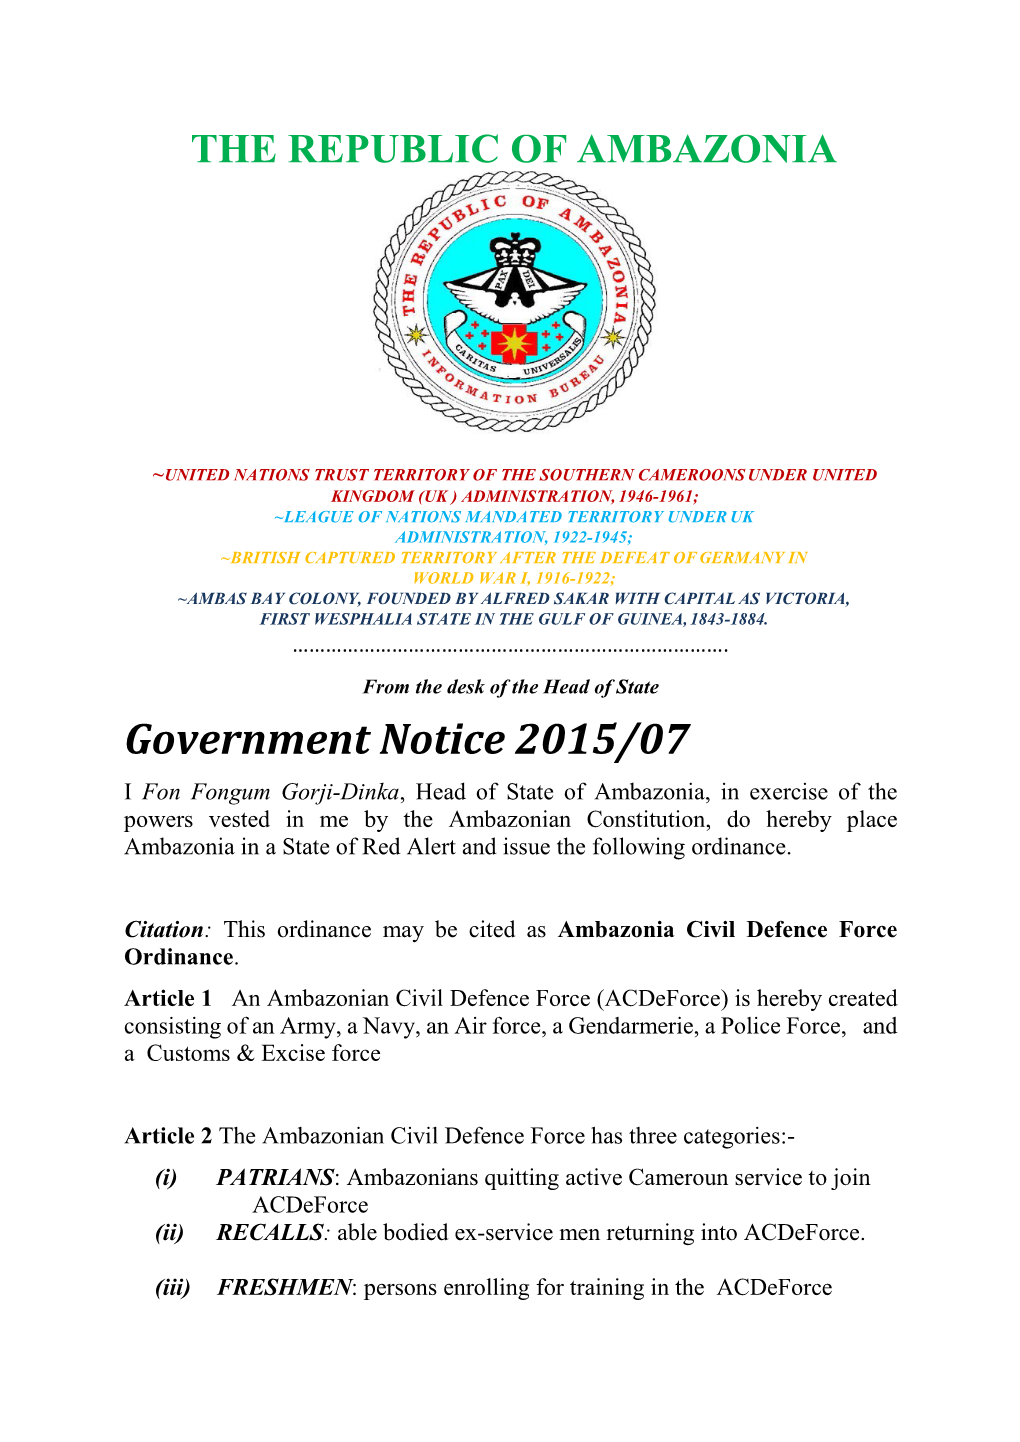 Government Notice 2015/07